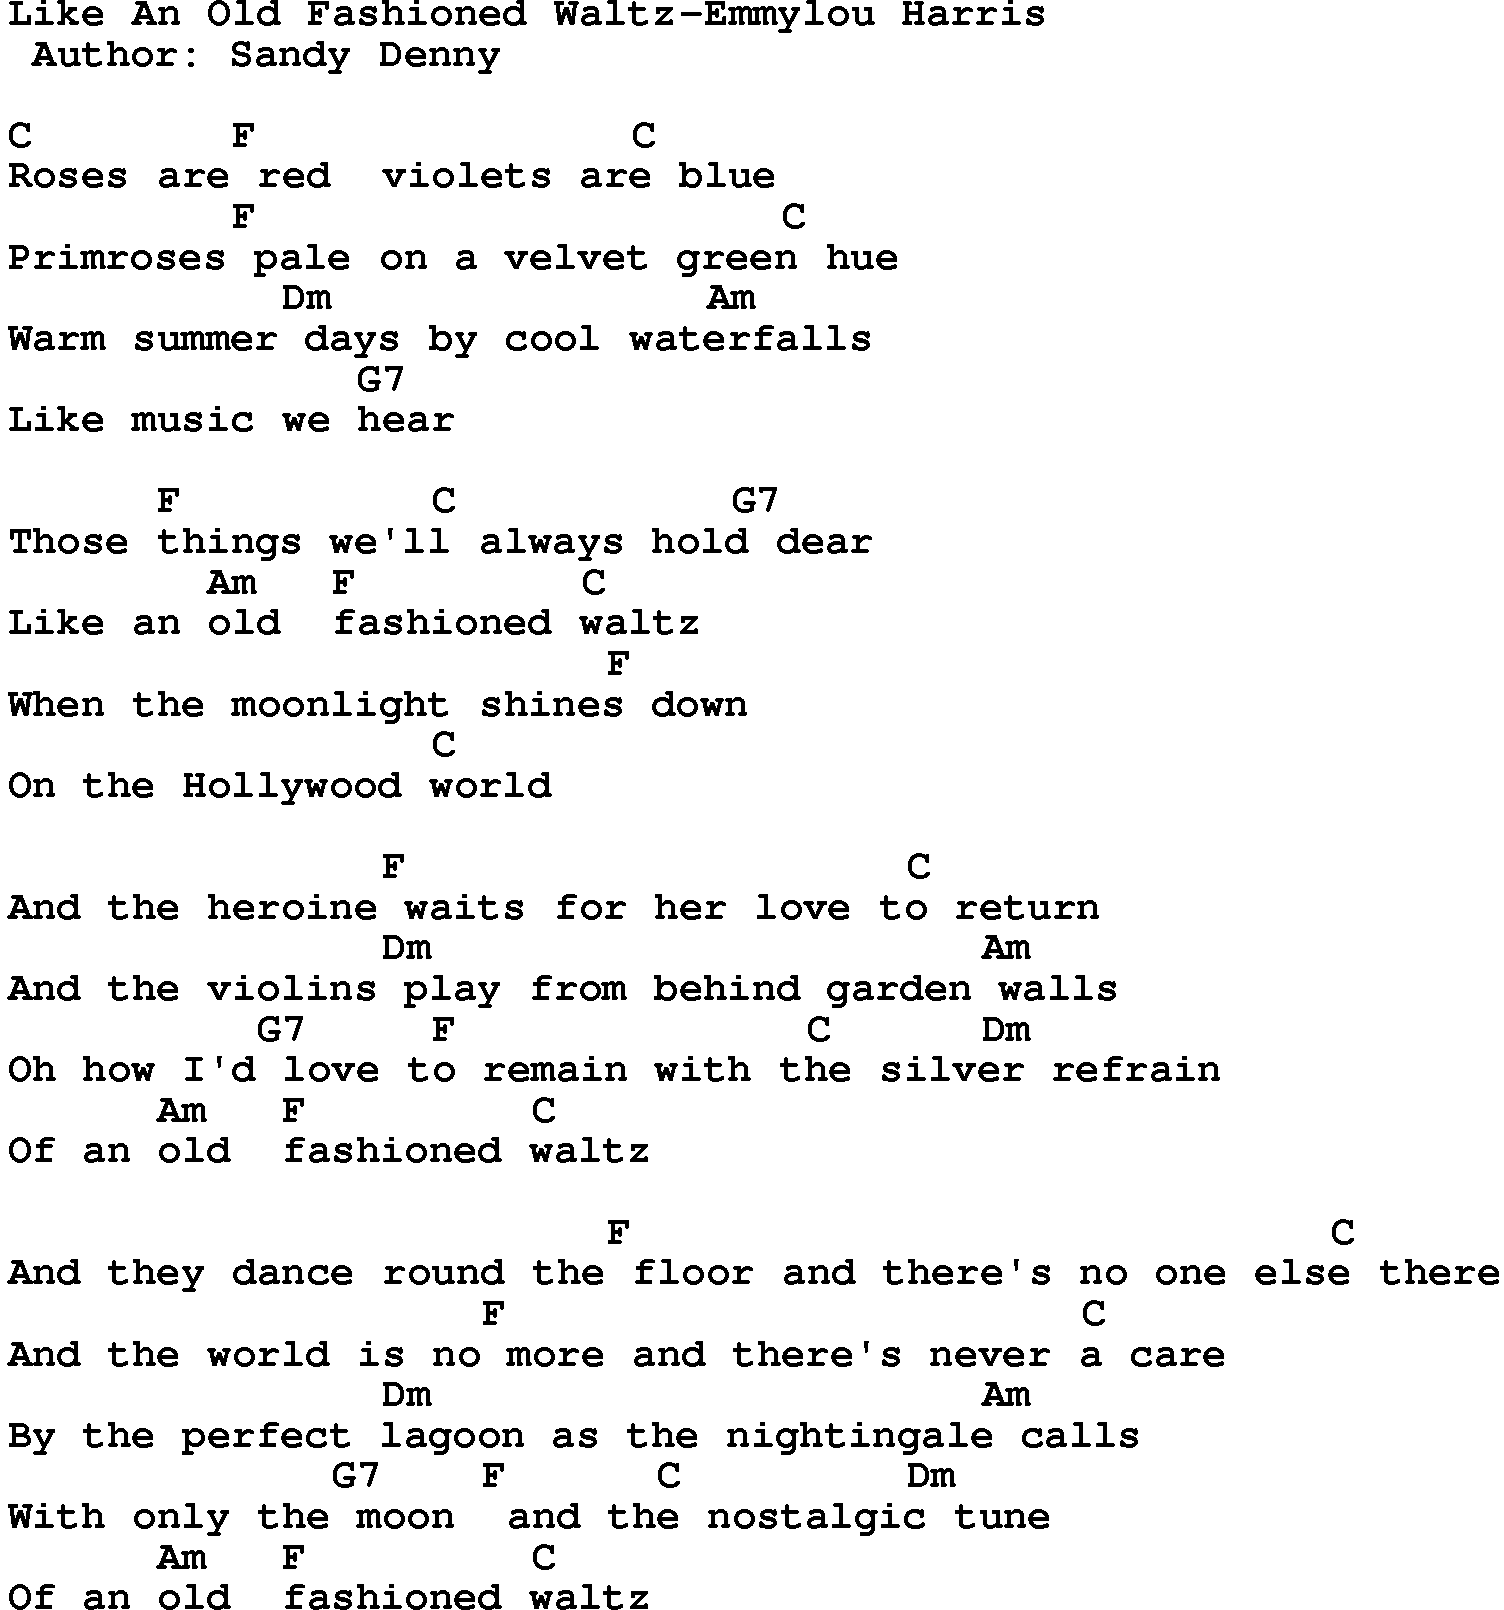 Country music song: Like An Old Fashioned Waltz-Emmylou Harris lyrics and chords